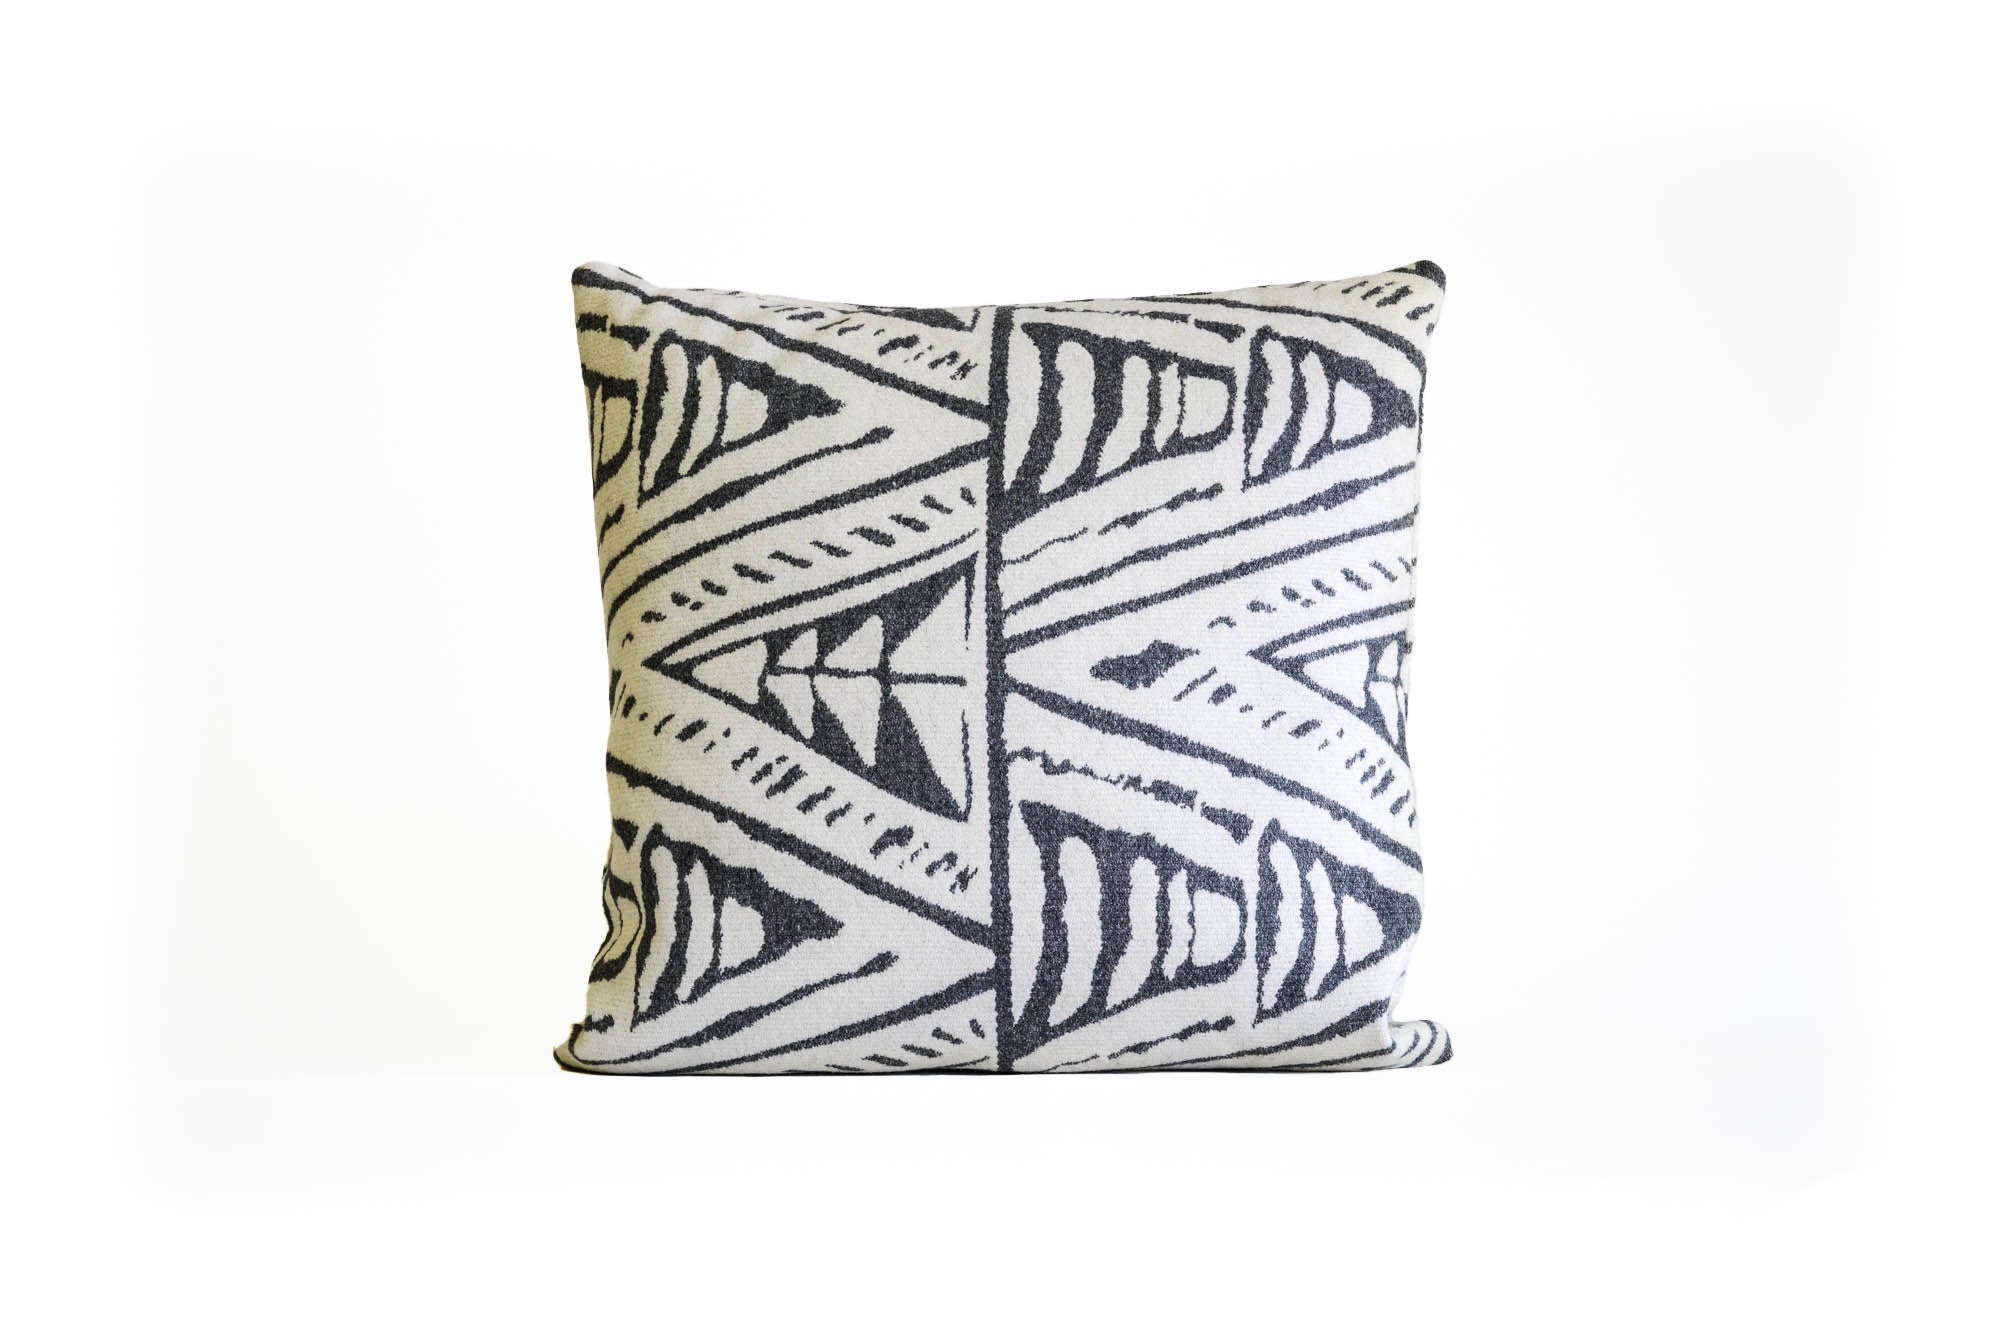 Wool Patterned Textural Pillow Gray and White